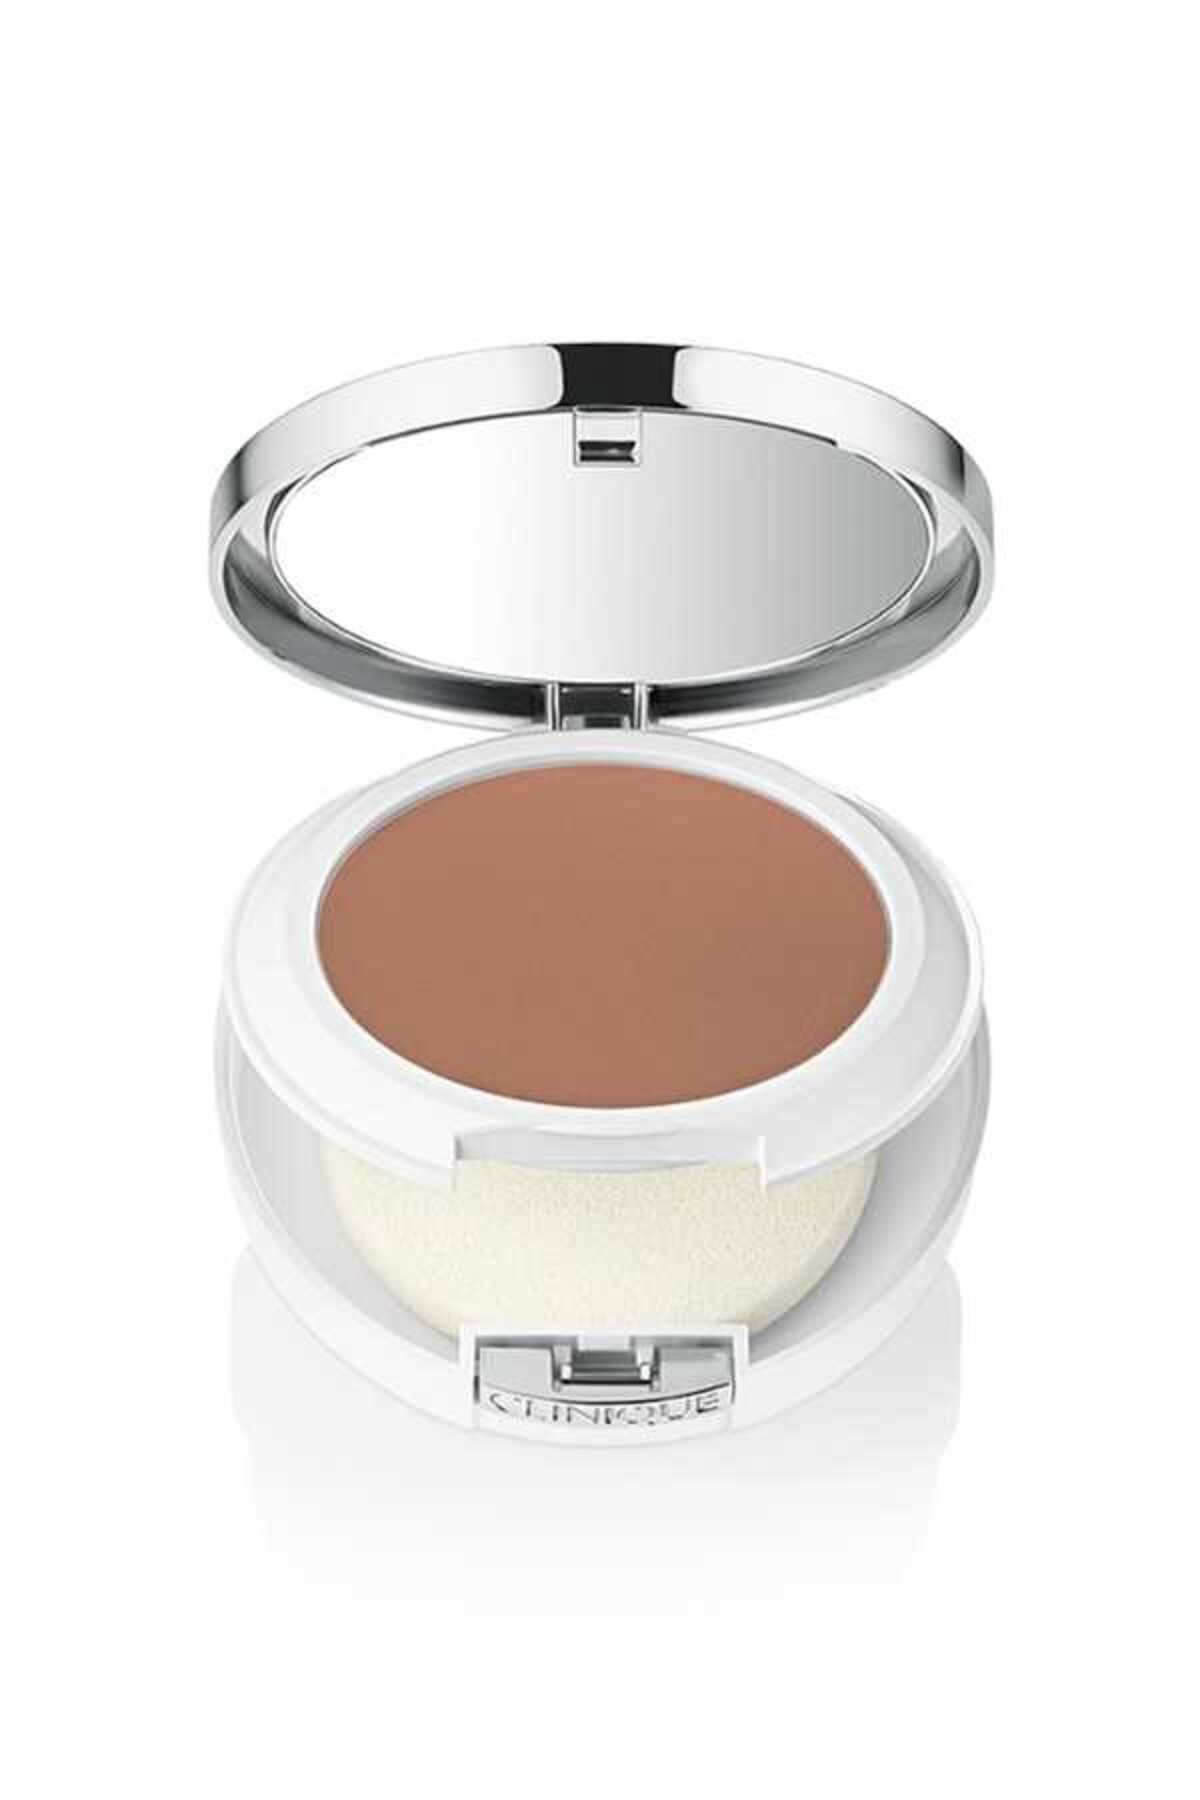 Clinique Pudra - Beyond Perfecting Neutral 14.5 g 020714755997